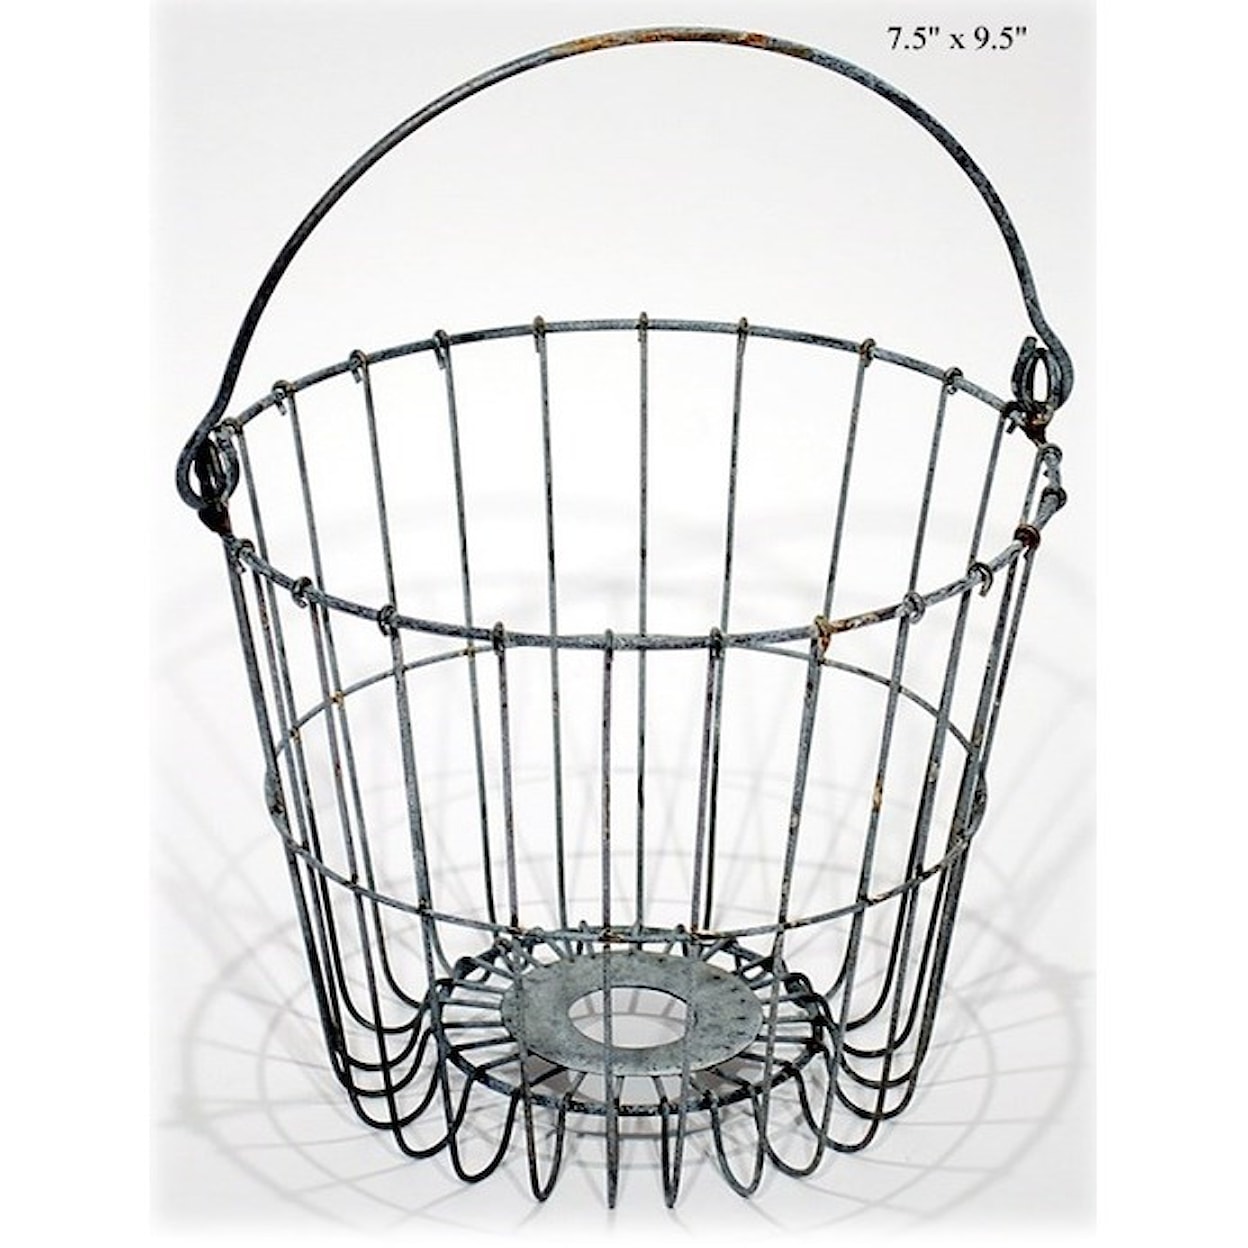 Will's Company Accents Wire Pail - 9.5"